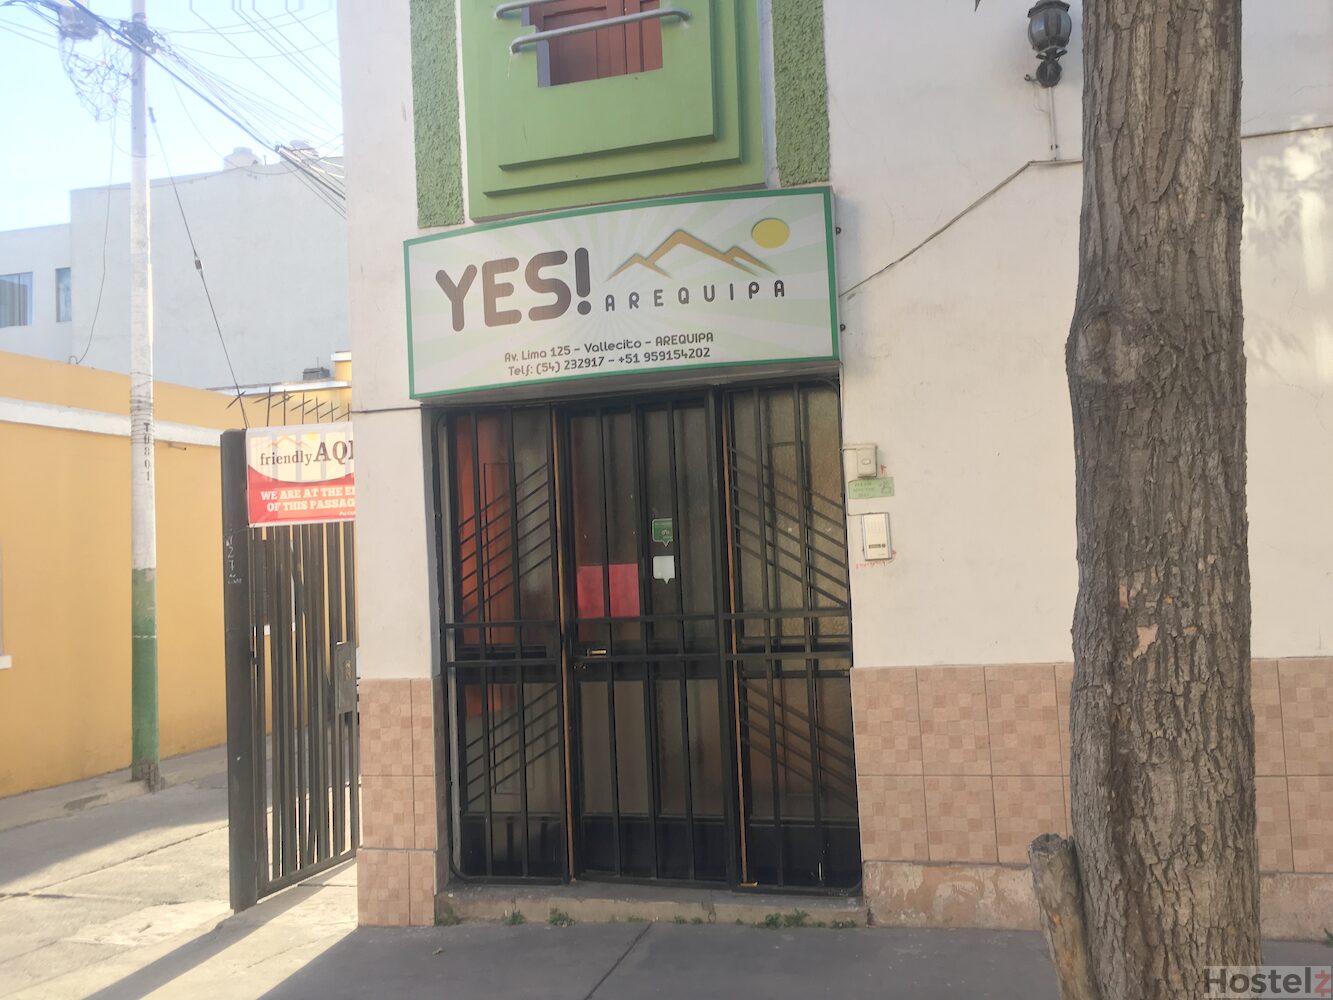 Yes Arequipa Hostel, Arequipa - 2023 Price & Reviews Compared